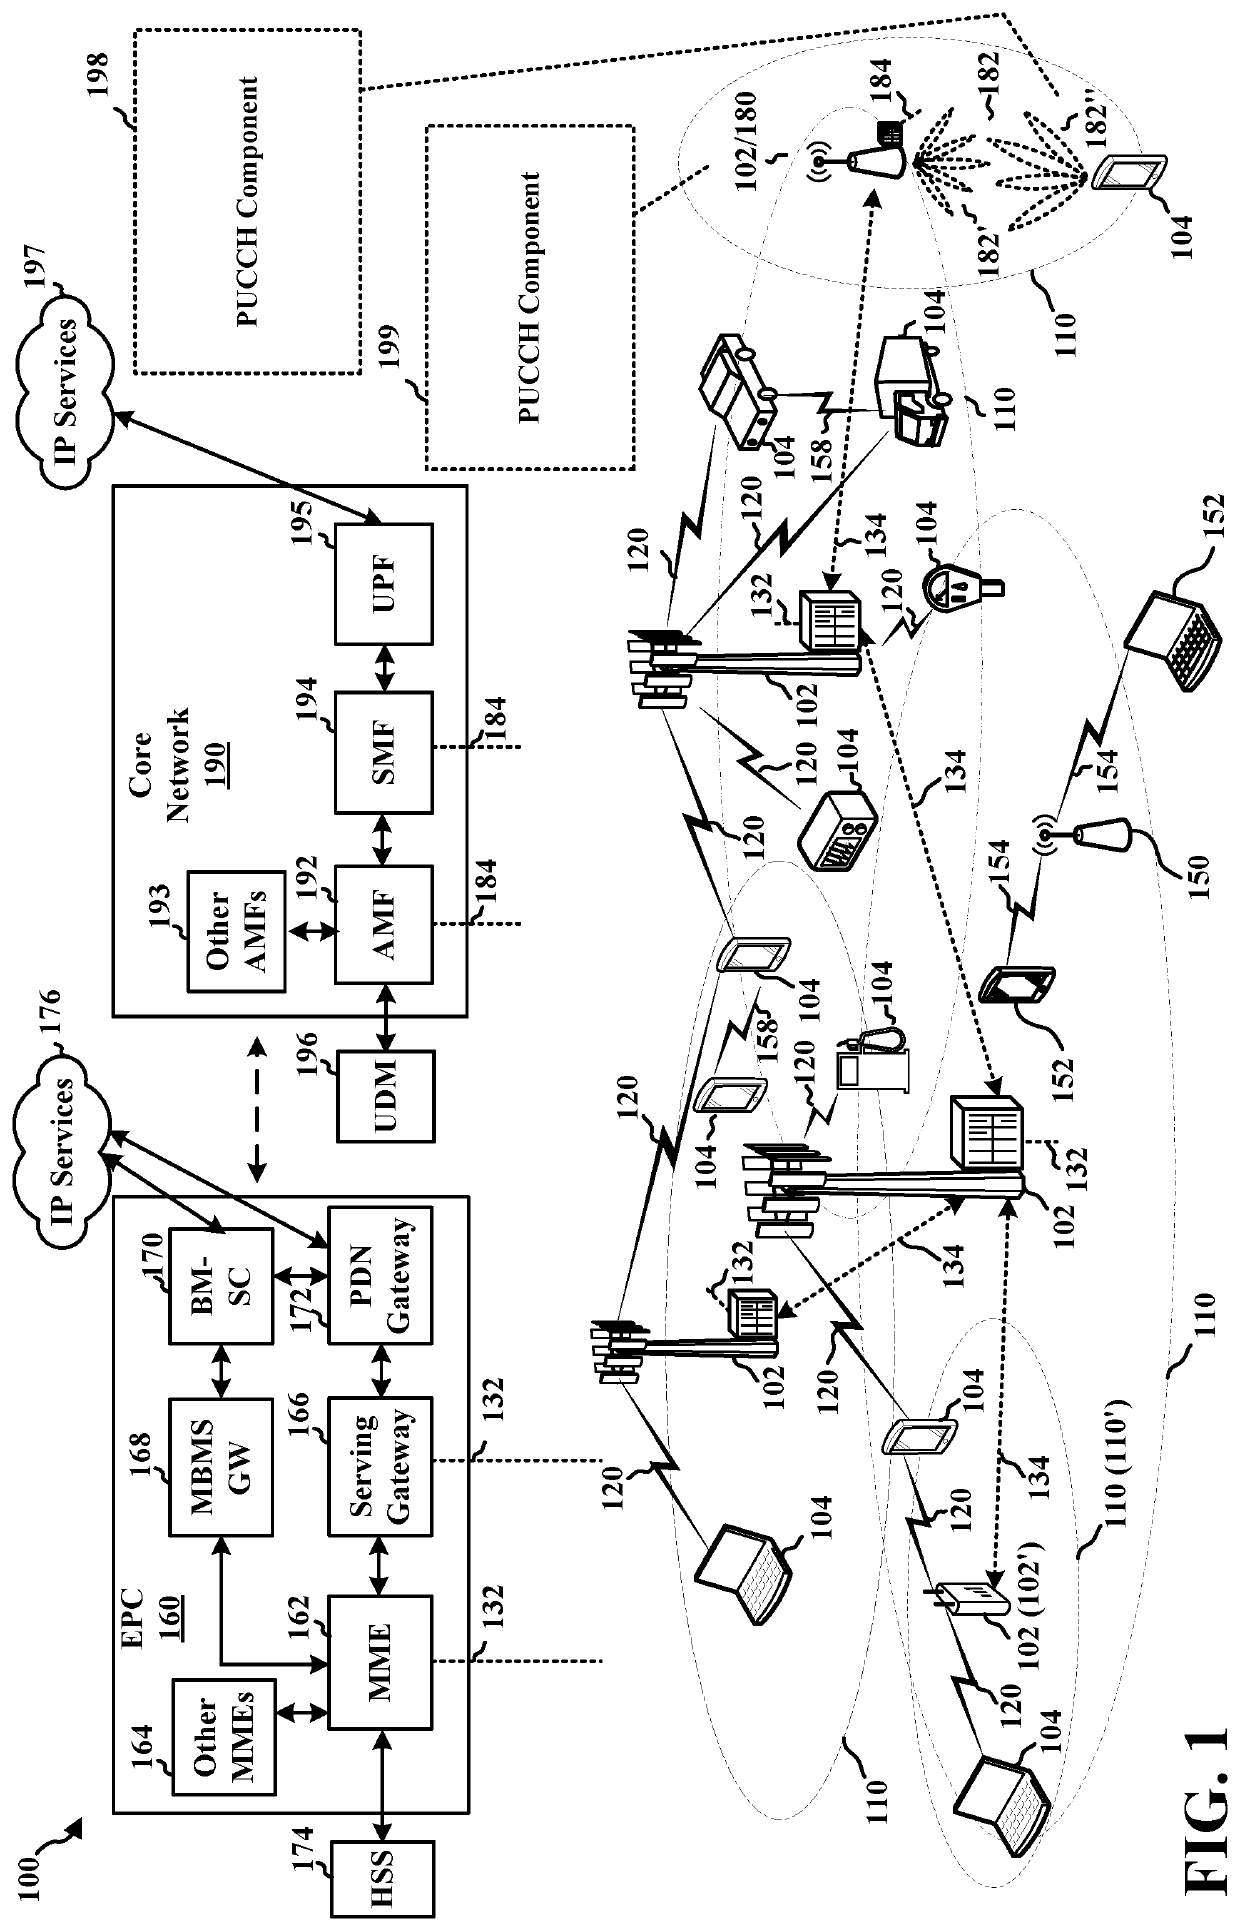 Physical uplink control channel with adaptive demodulation reference signal density